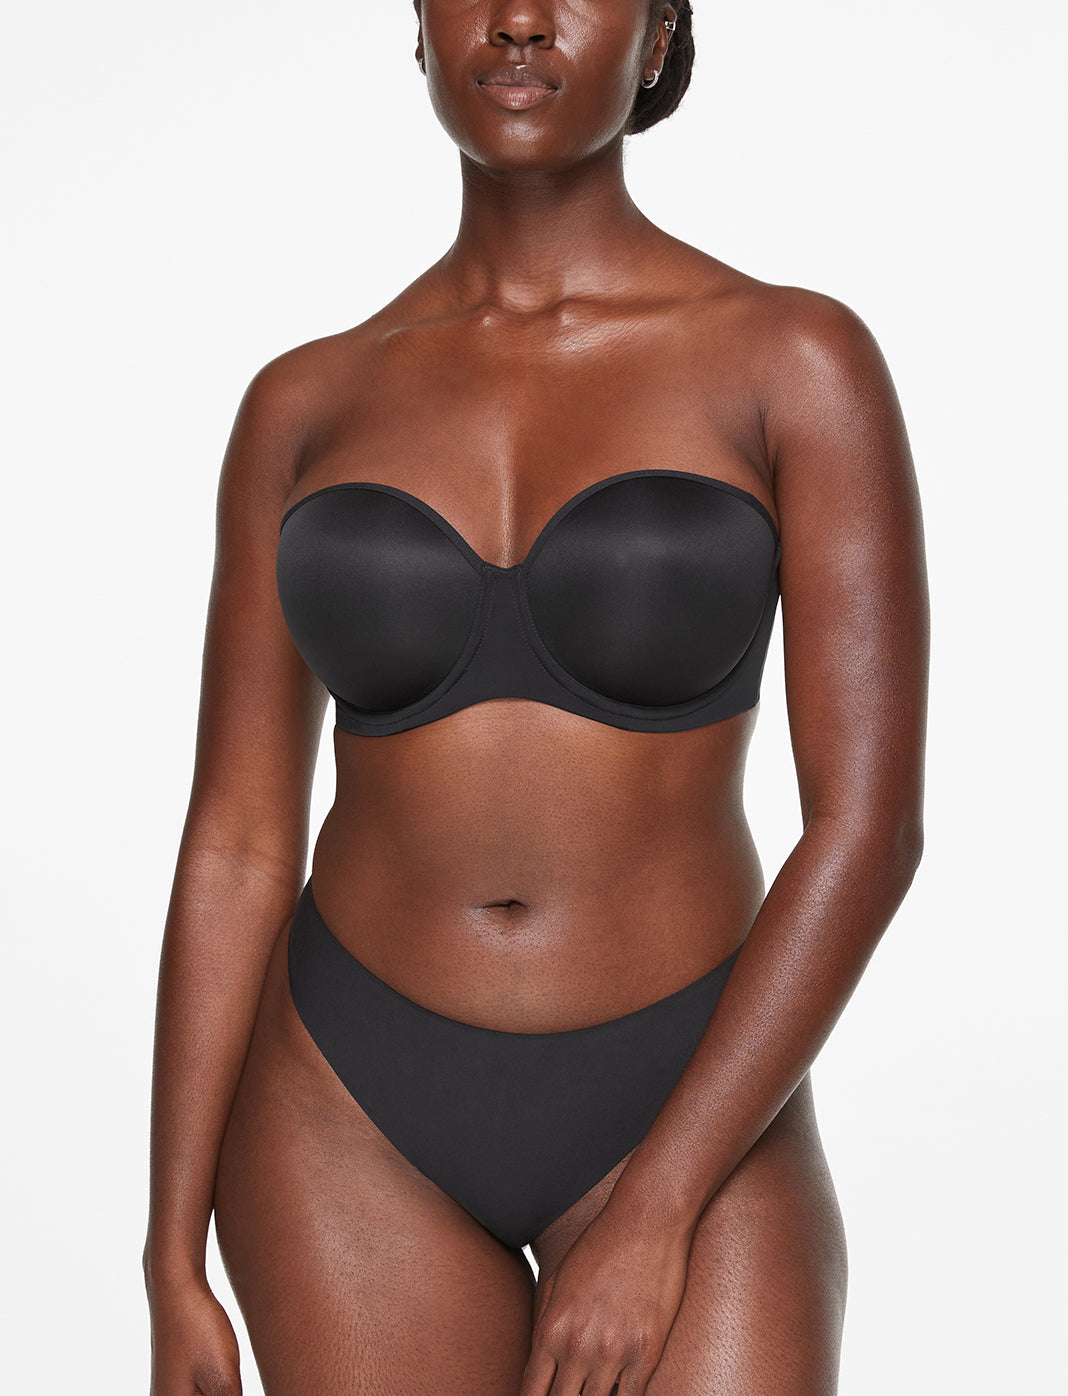 The Can't-Live-Without-It Bra  Meet the strapless bra to end all